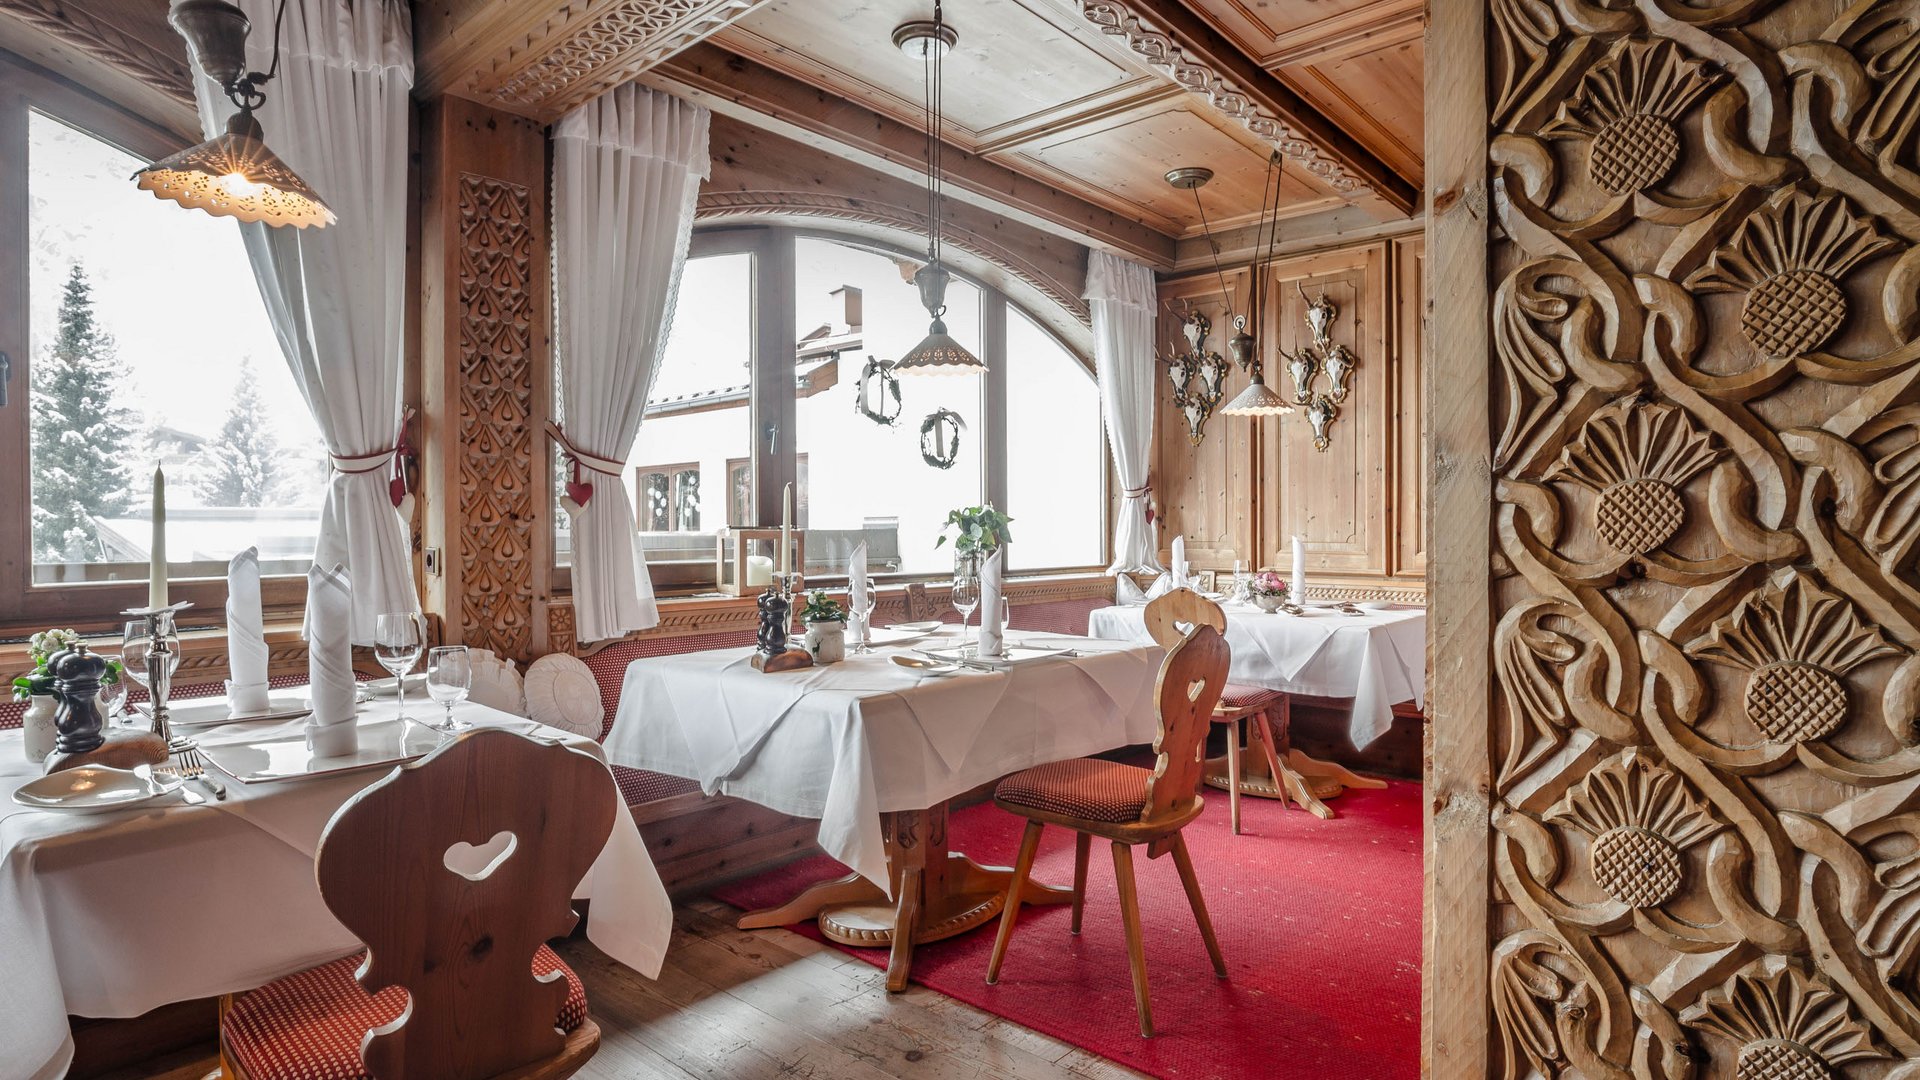 One of the best toque-awarded restaurants in Tyrol